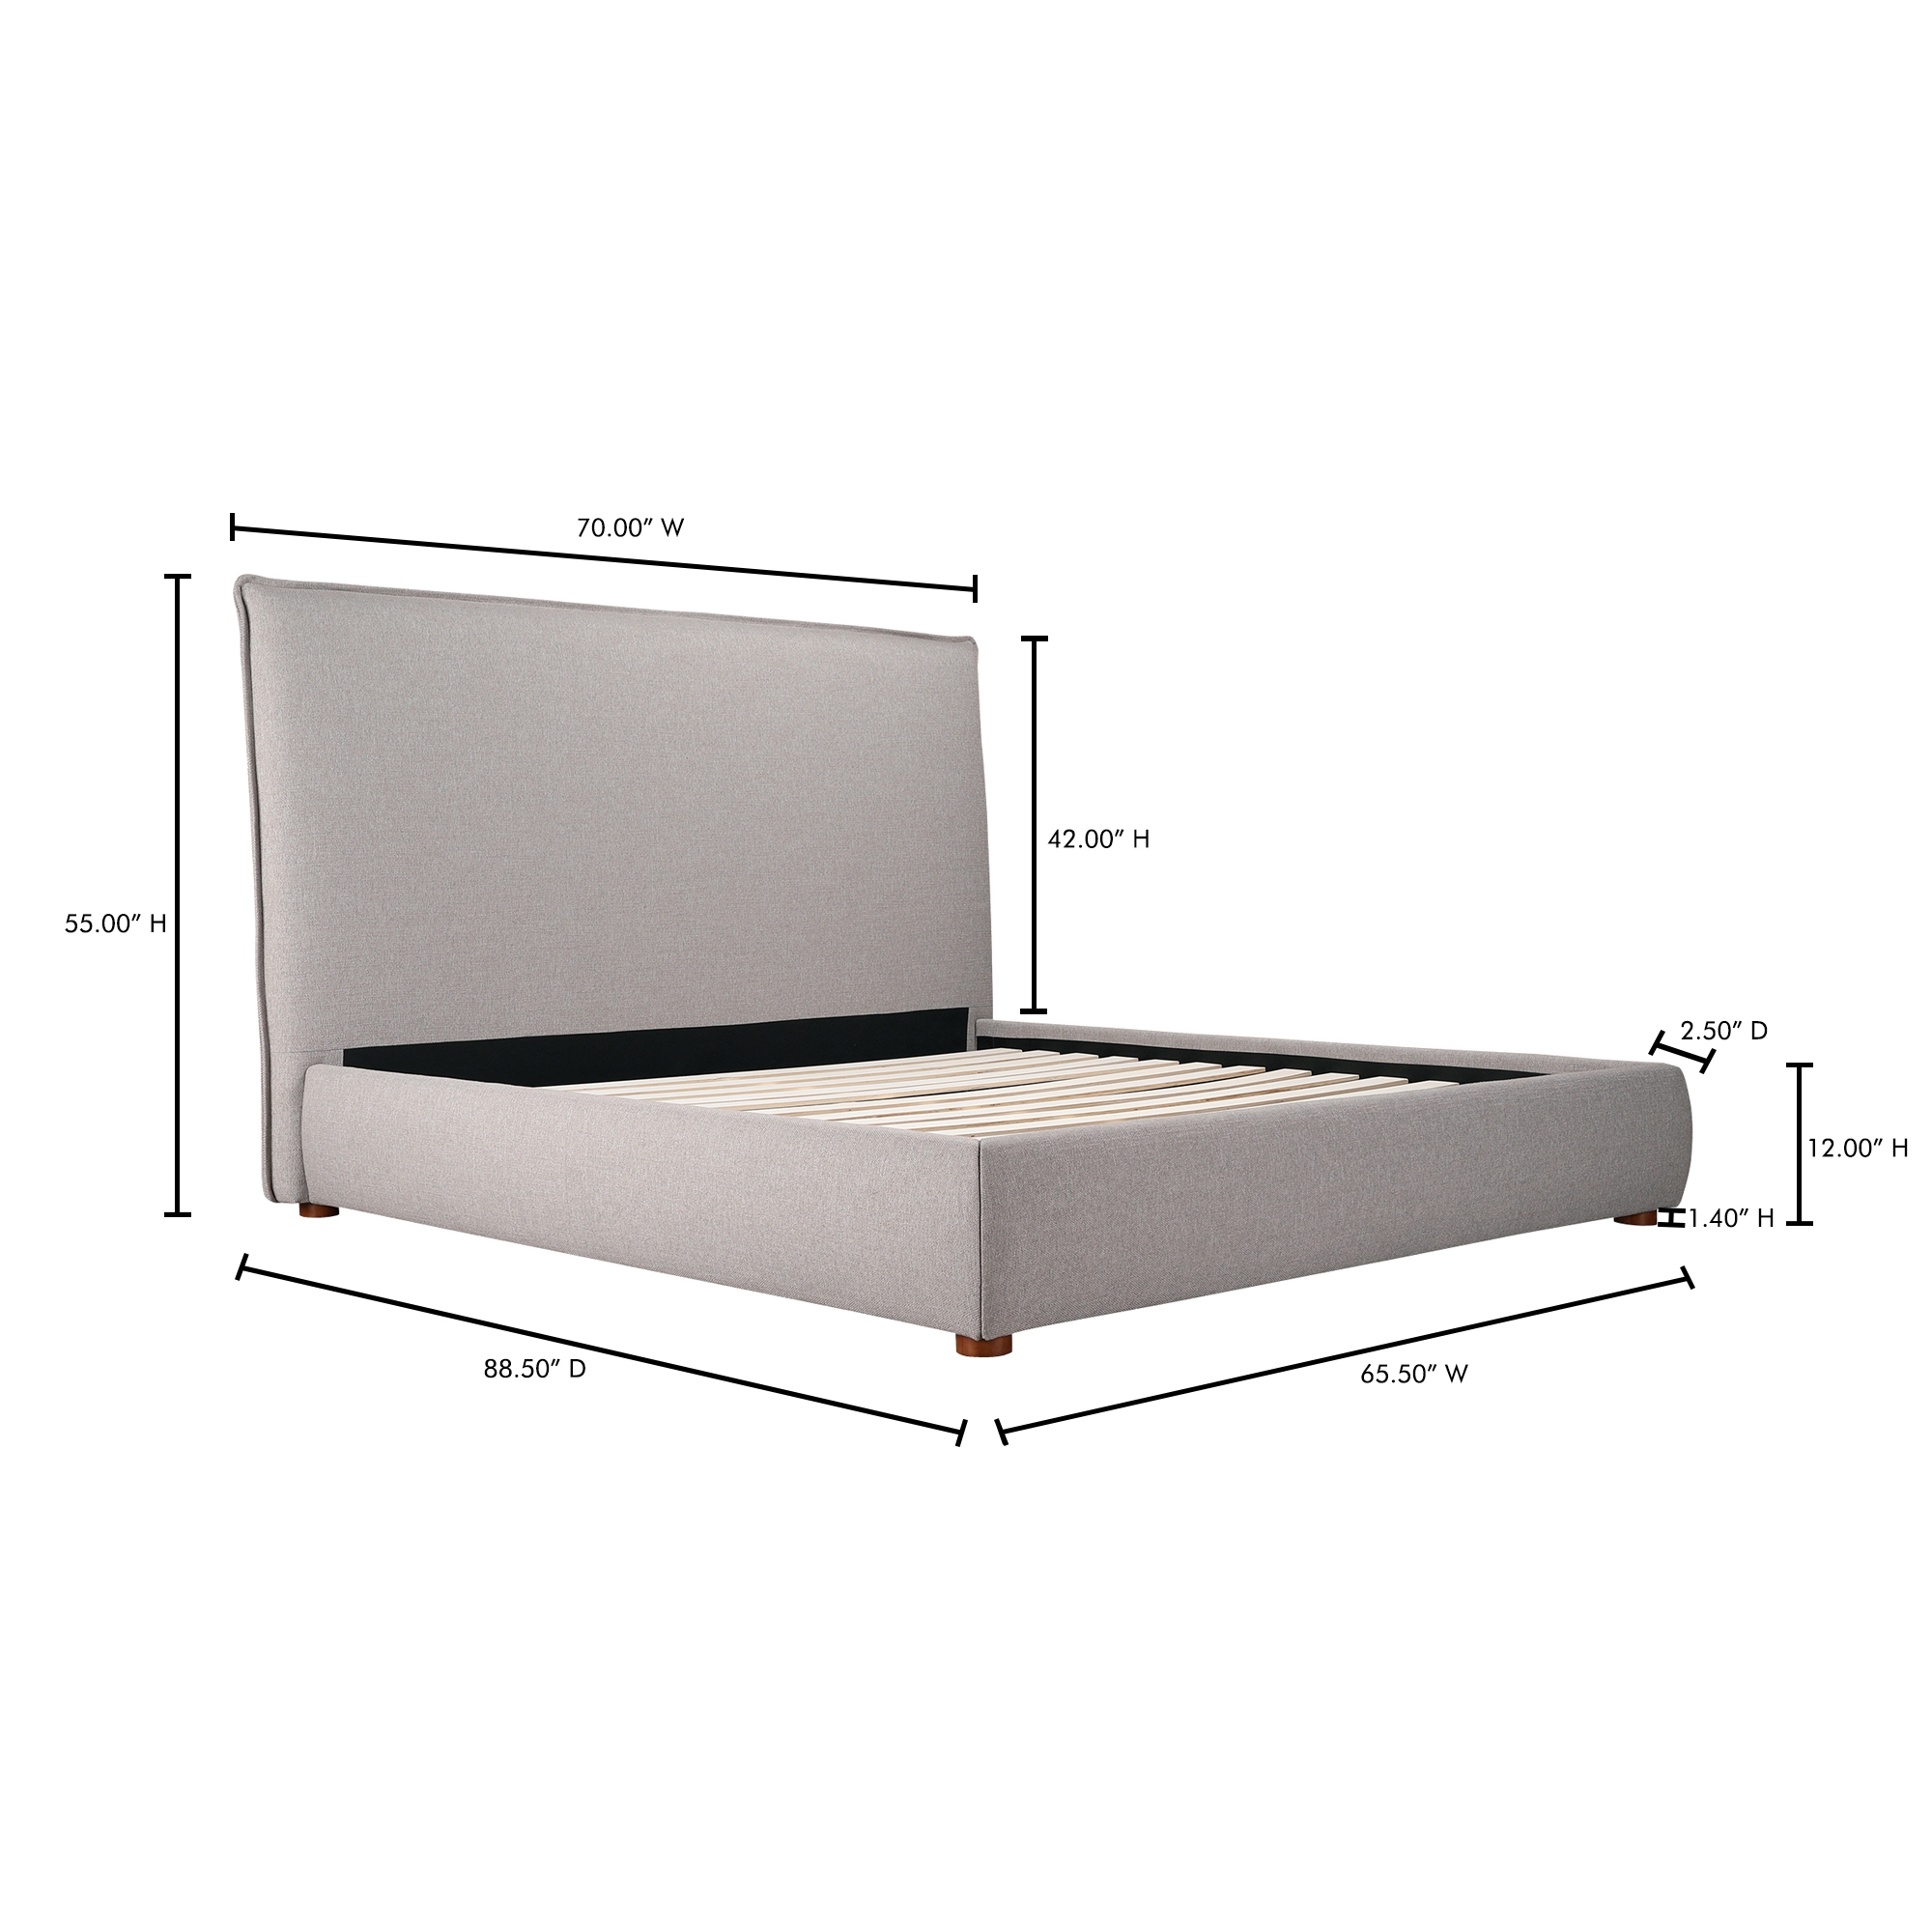 Luzon Queen Bed Tall Headboard Greystone - Image 12